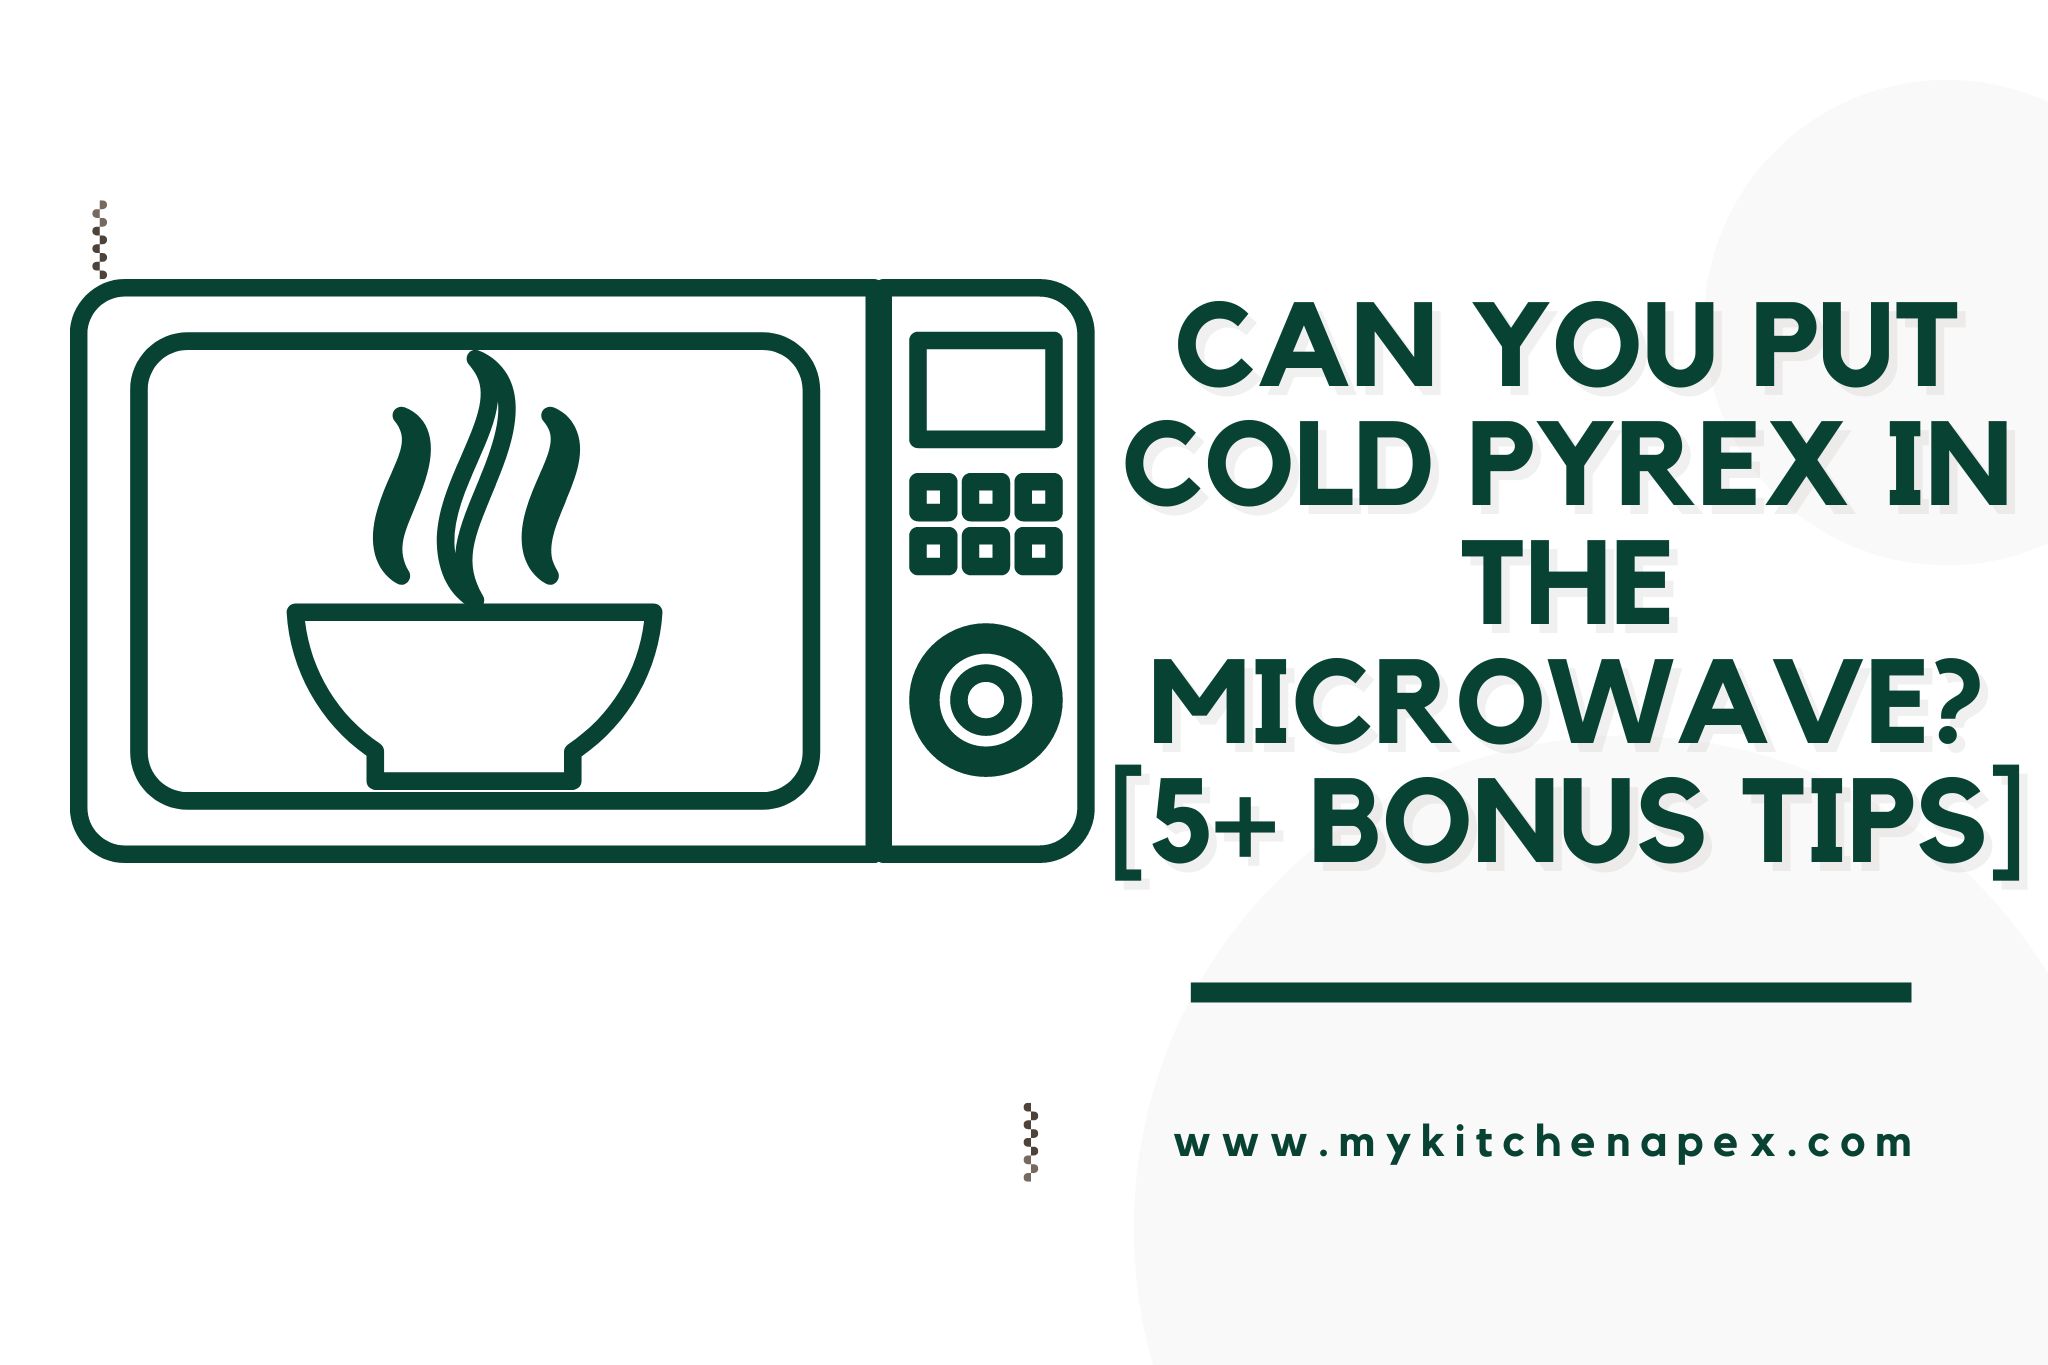 Can You Put Cold Pyrex In The Microwave? [5+ Bonus Tips]